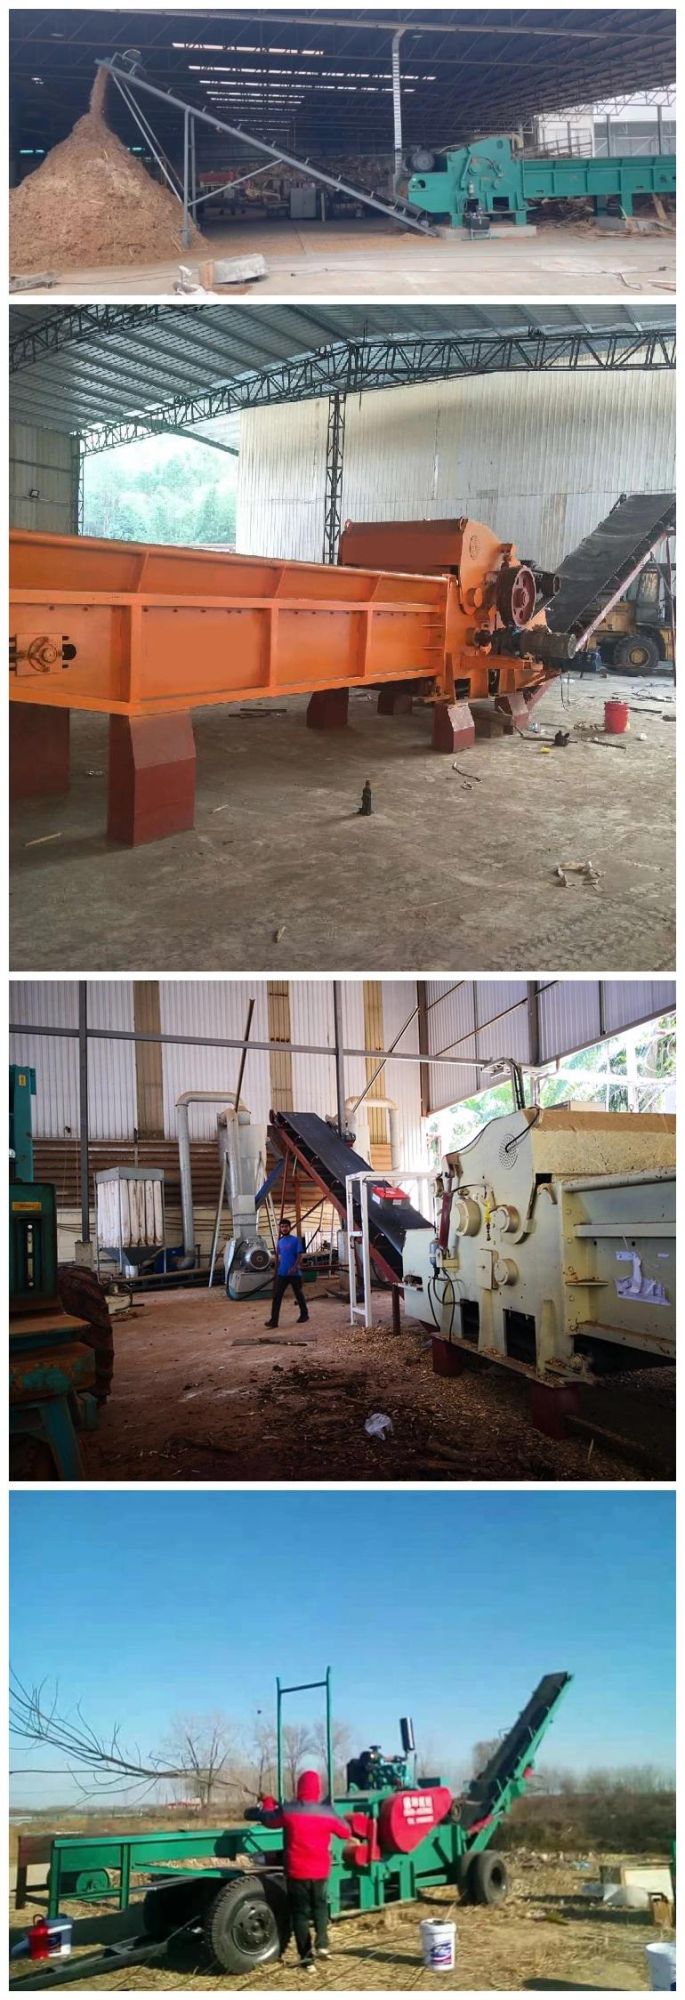 Hot Sale Drum-Type or Disc-Type Wood Chipper with Widely Application Manufacturer in China